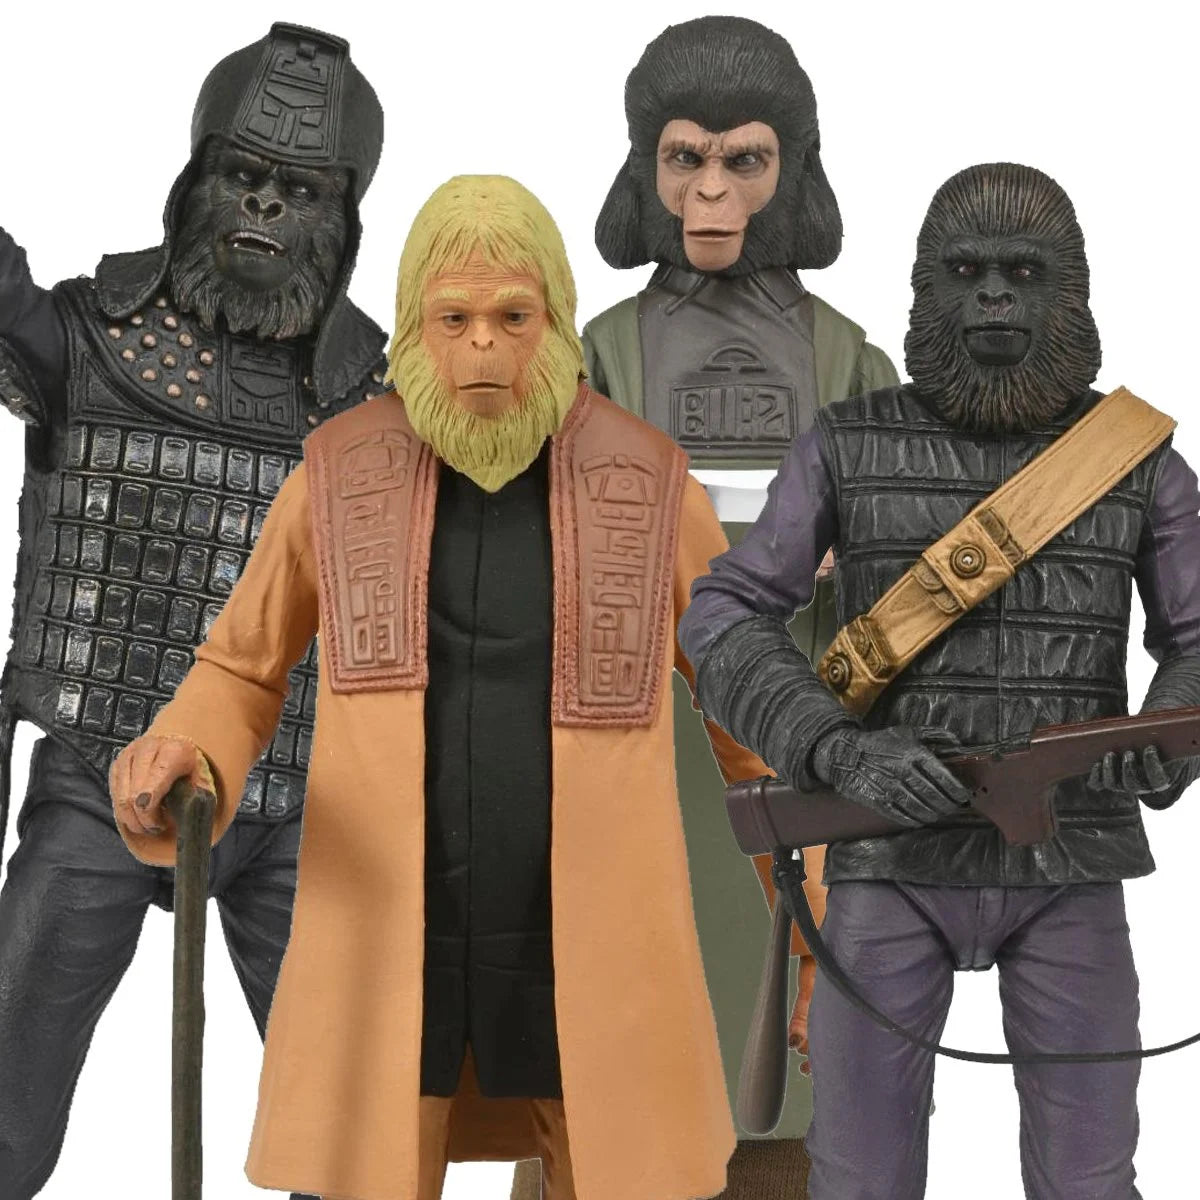 NECA - Planet of the Apes: Legacy Series 7" Scale Action Figure Set of 4 (Pre-Order Ships June)